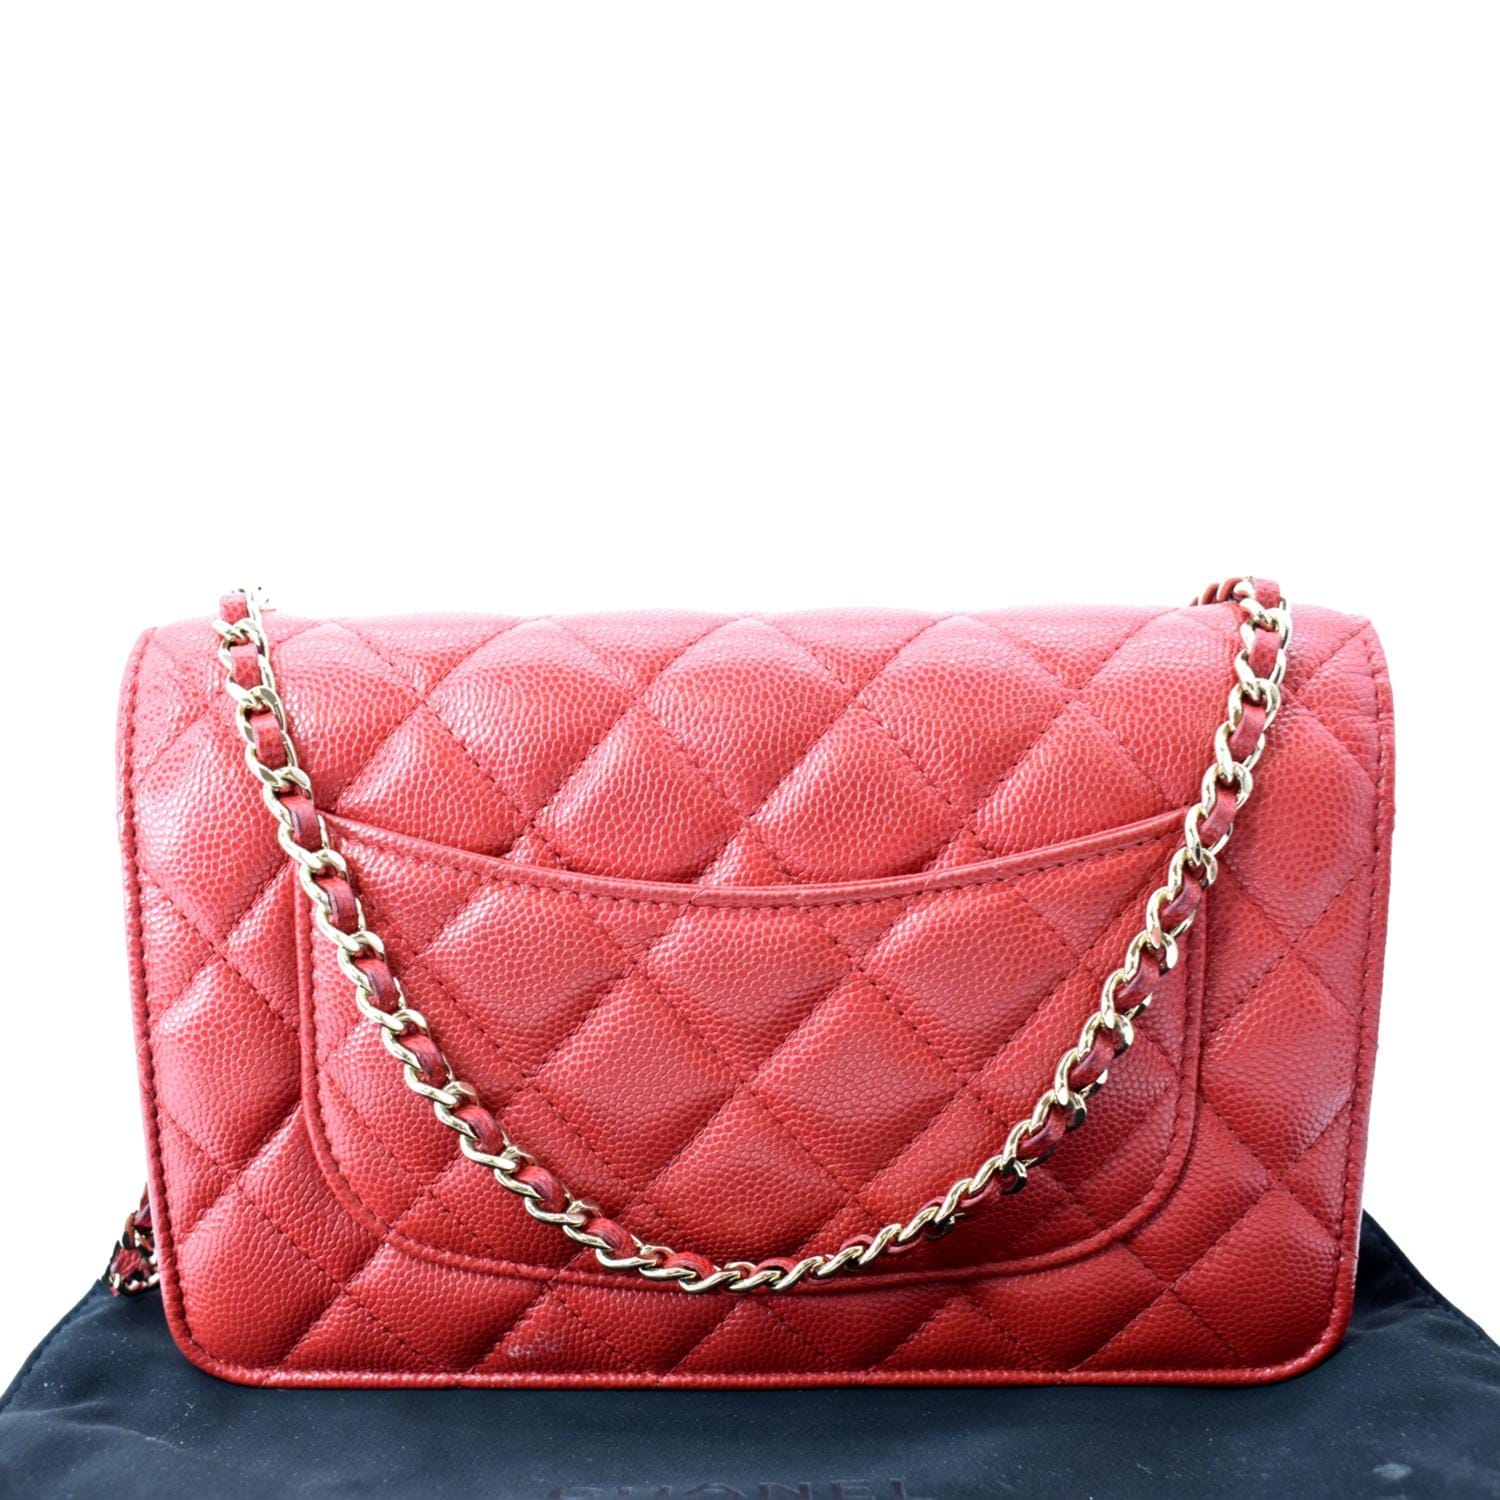 2017 Chanel Red Chevron Quilted Caviar Leather Wallet-On-Chain WOC